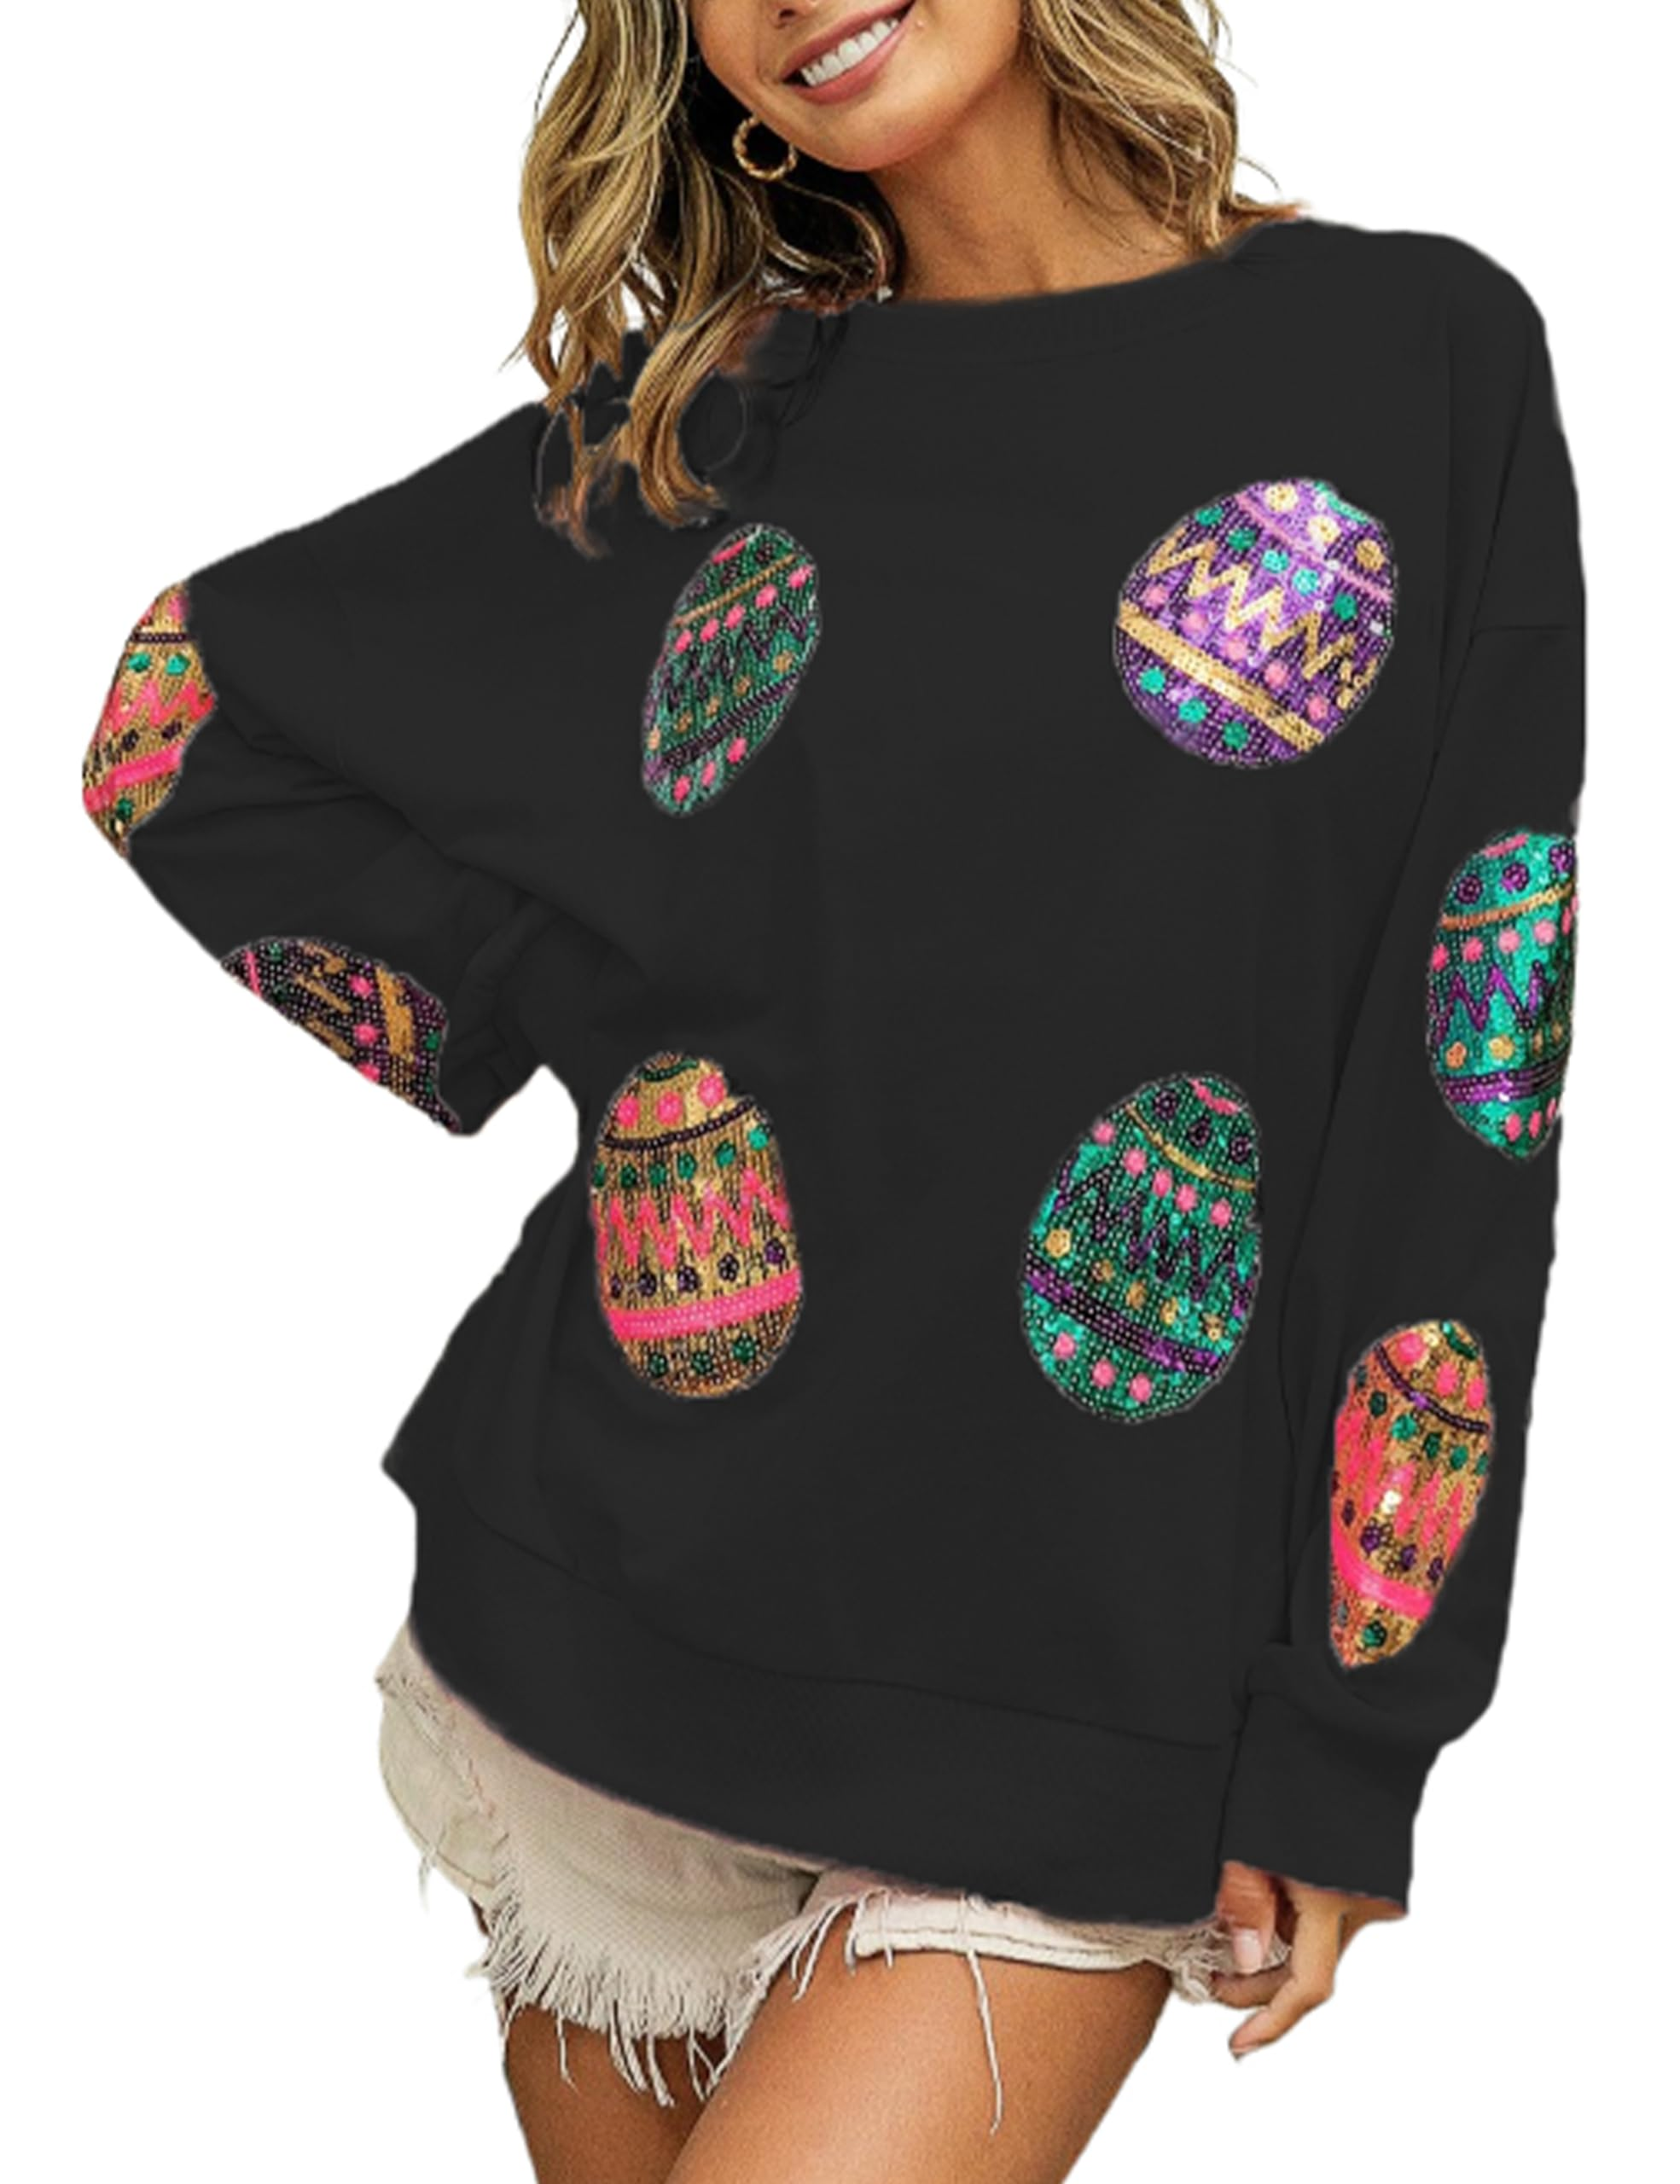 Sequined Knitted Sweater Long Sleeve Women's Clothing